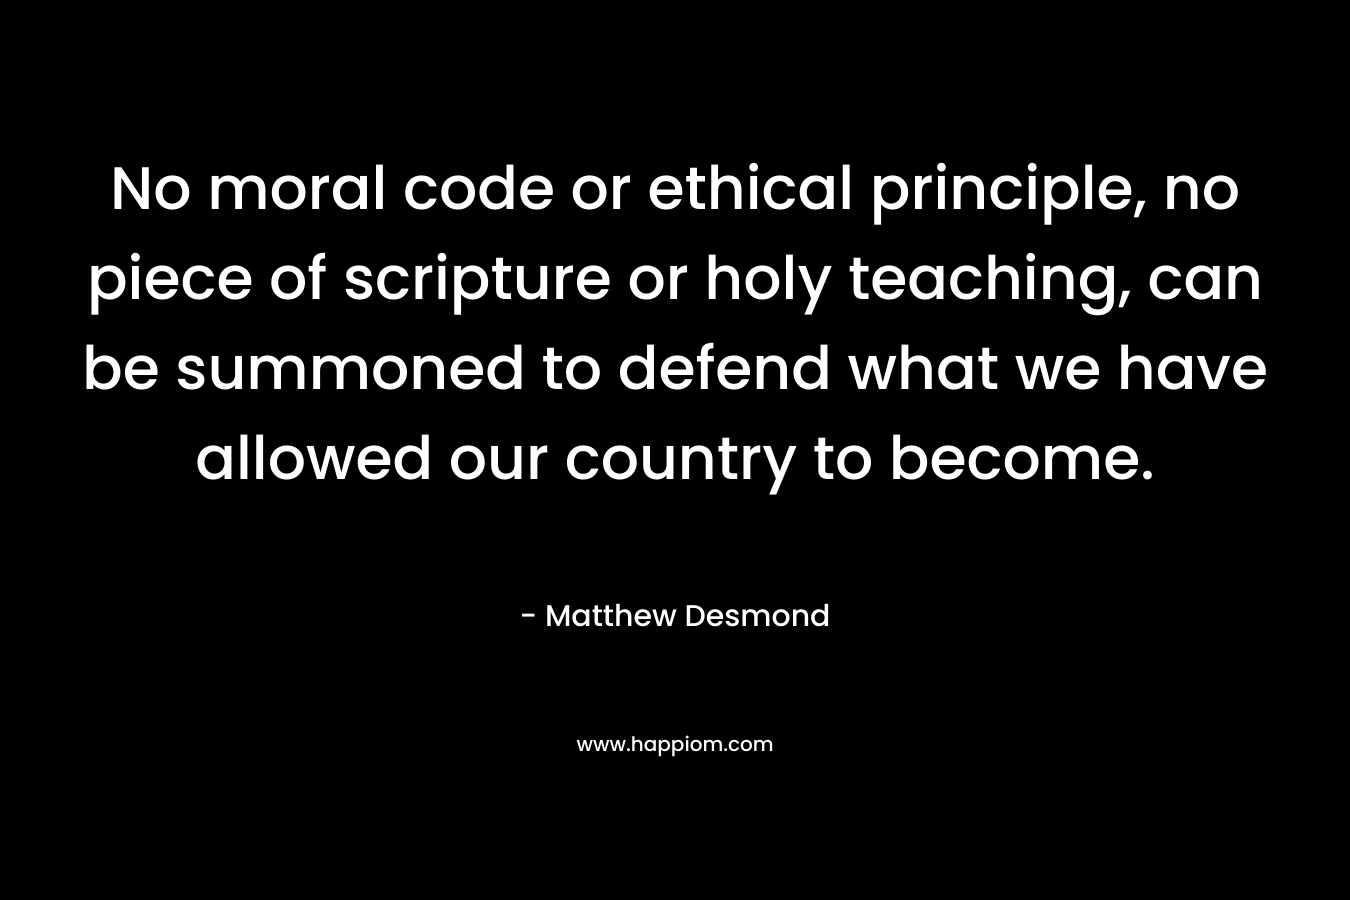 No moral code or ethical principle, no piece of scripture or holy teaching, can be summoned to defend what we have allowed our country to become.